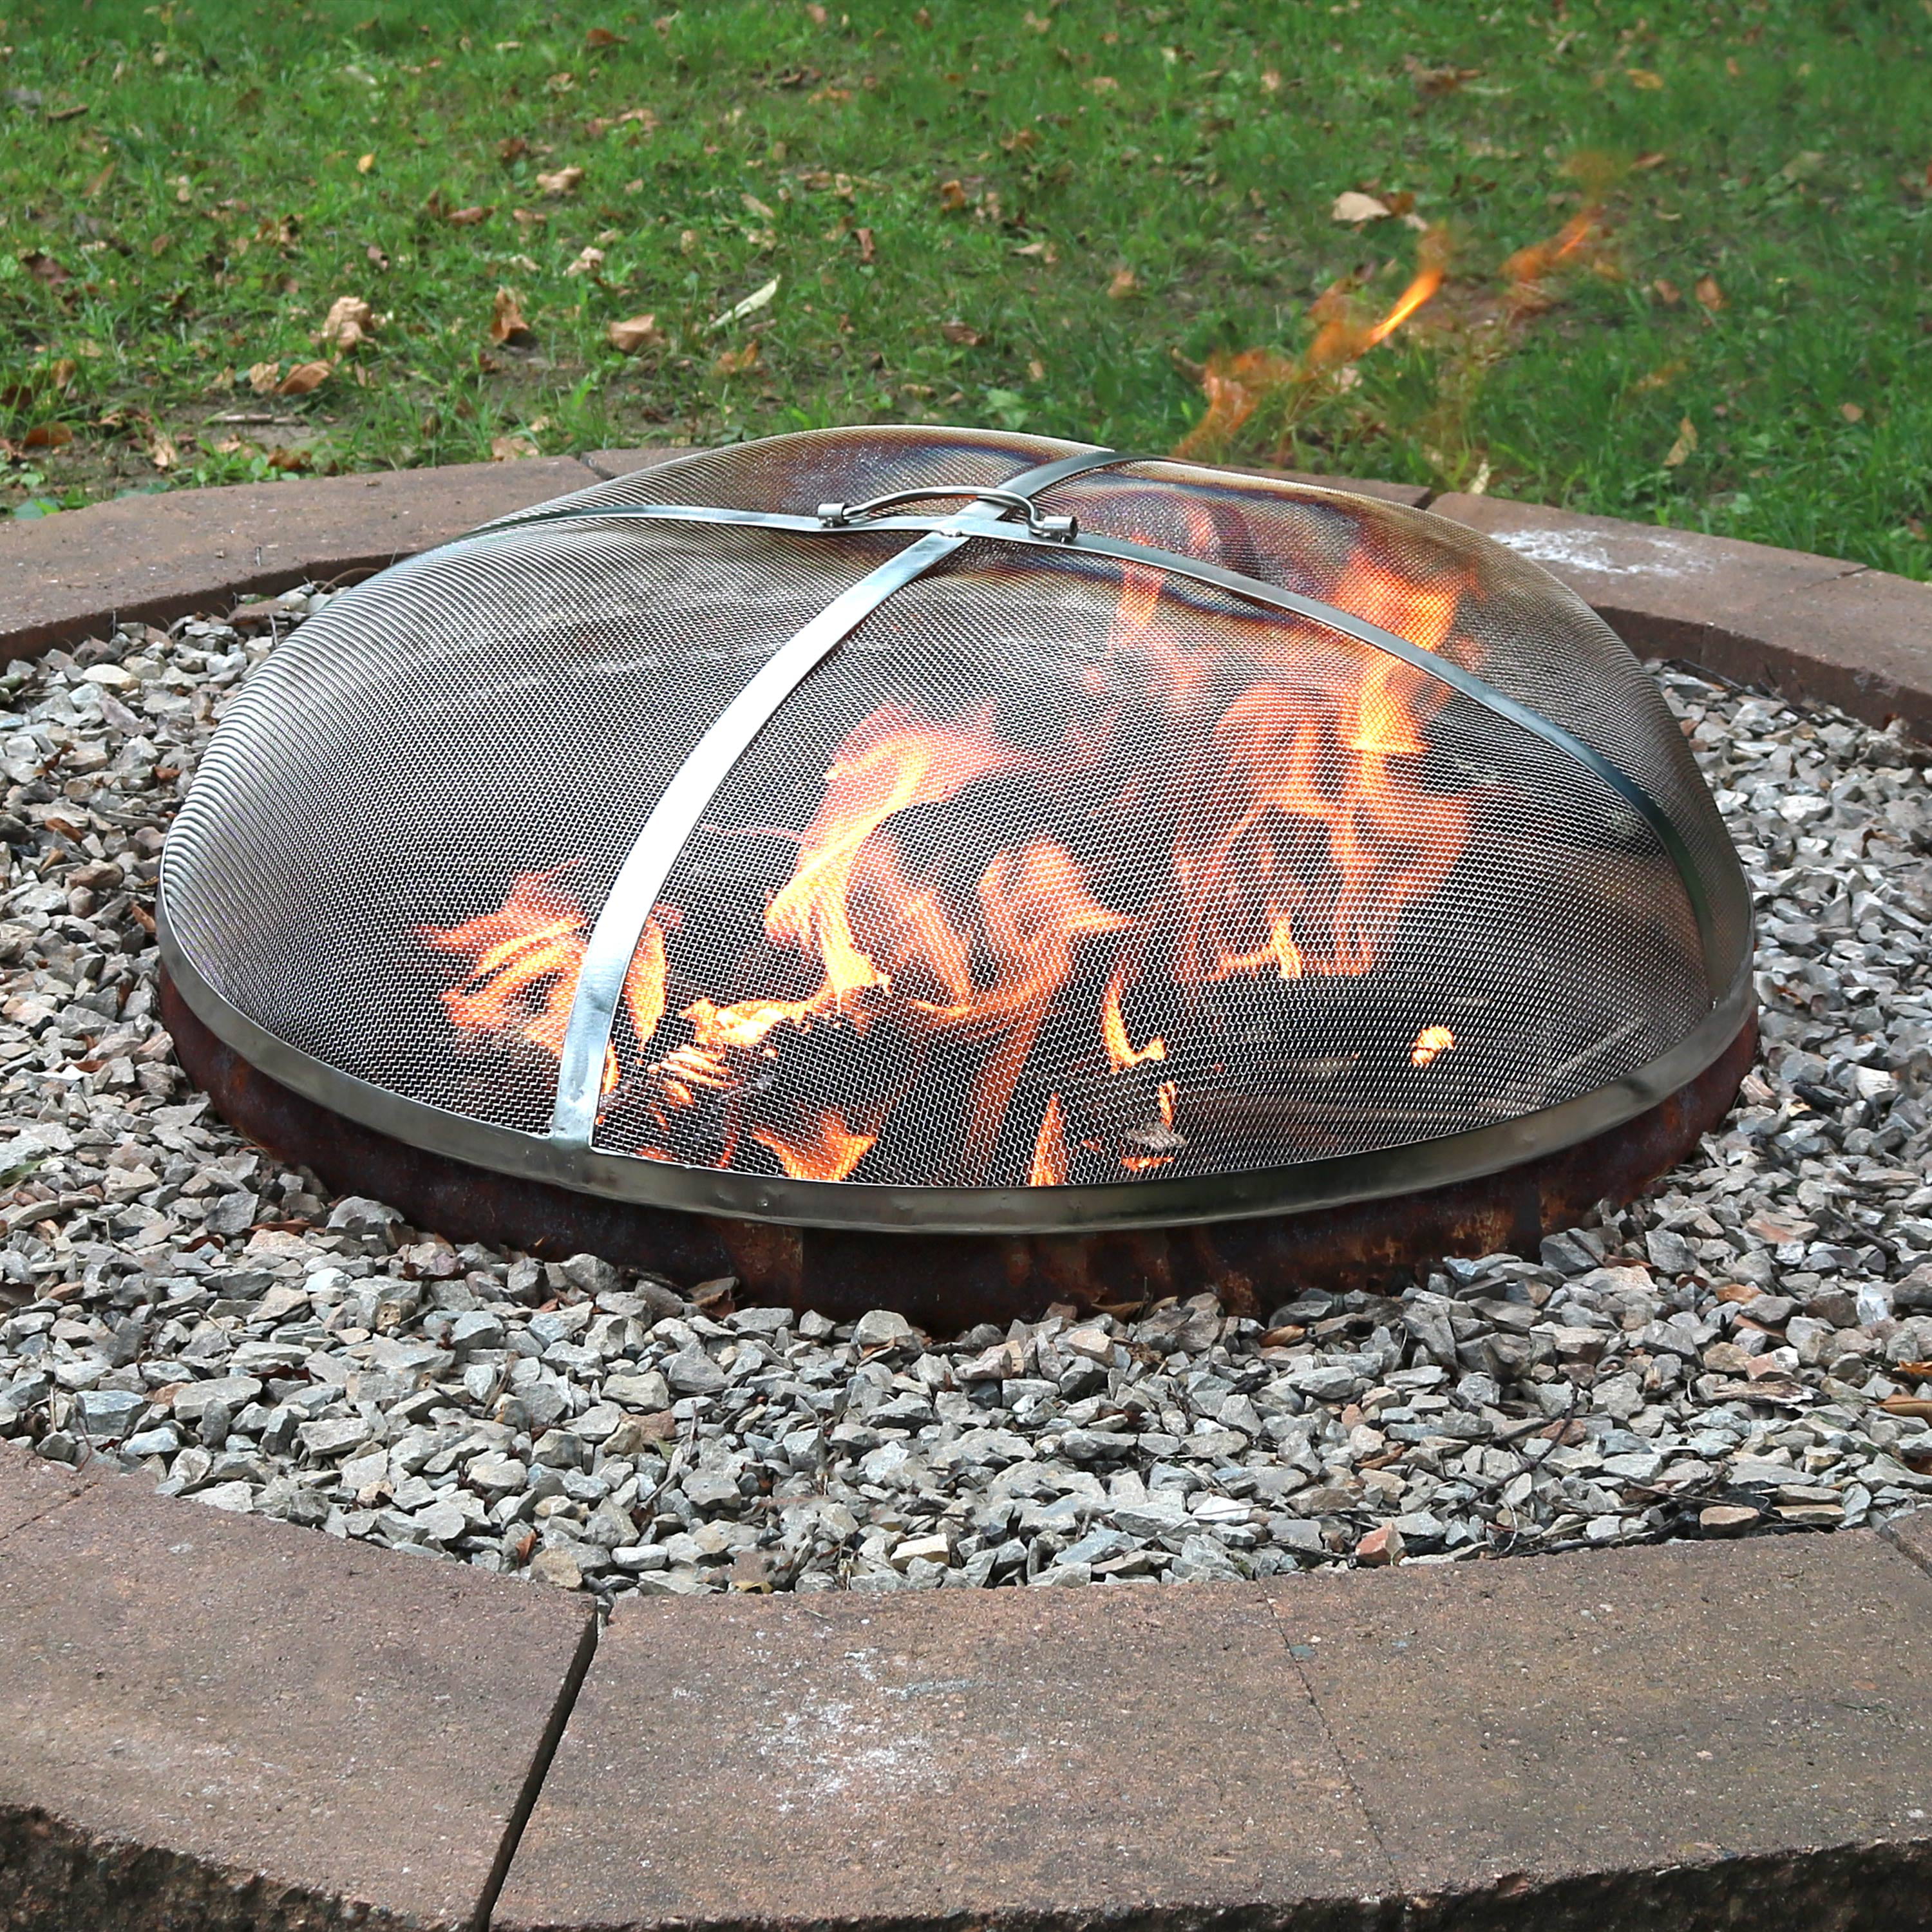 Sunnydaze Fire Pit Spark Screen Cover, Fire Pit Spark Screen Make Your Own